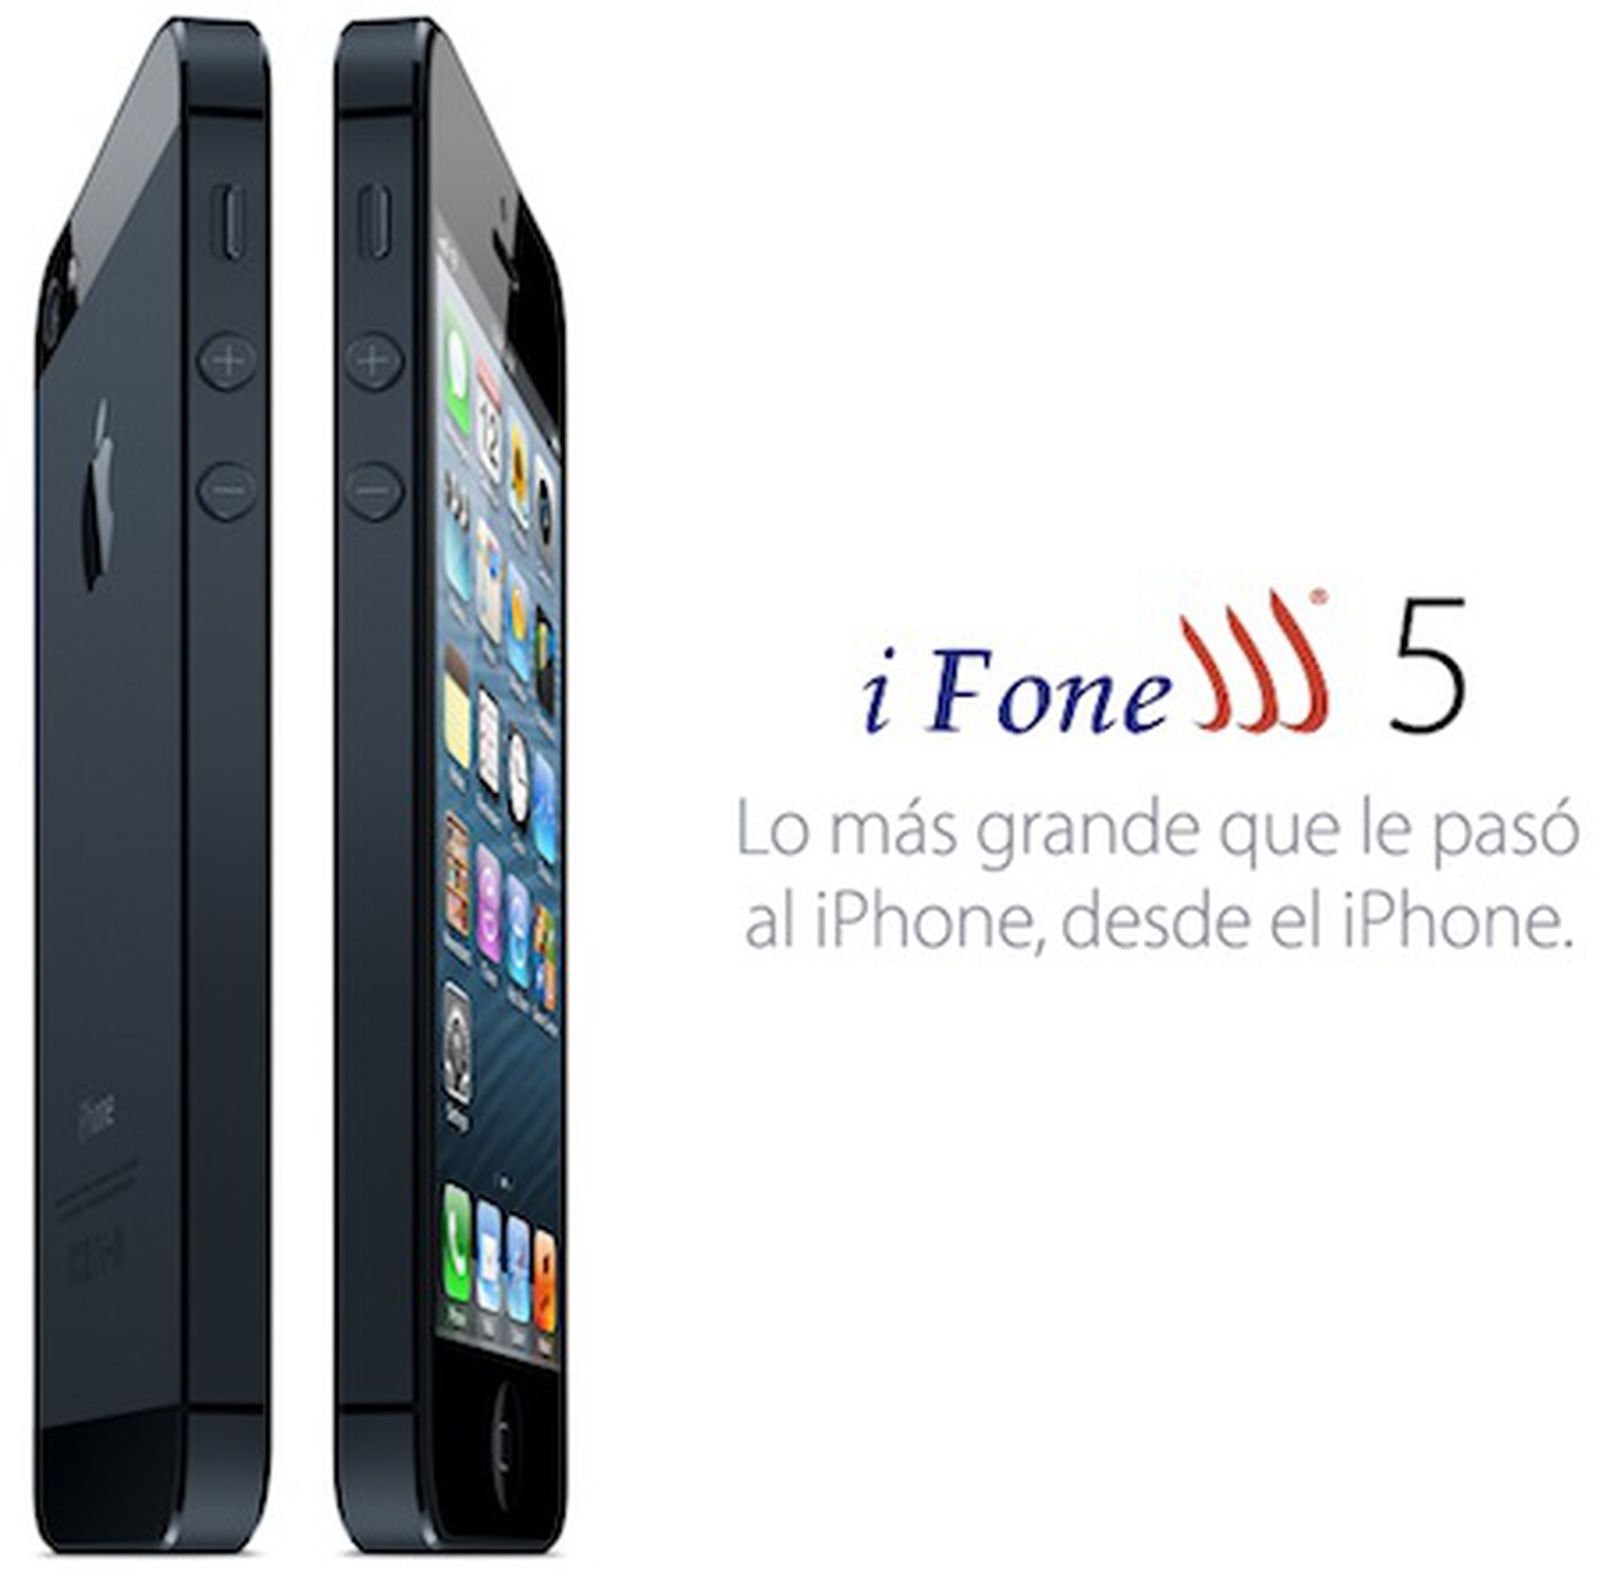 Apple Acquitted in Mexican 'iPhone' Naming Lawsuit - MacRumors